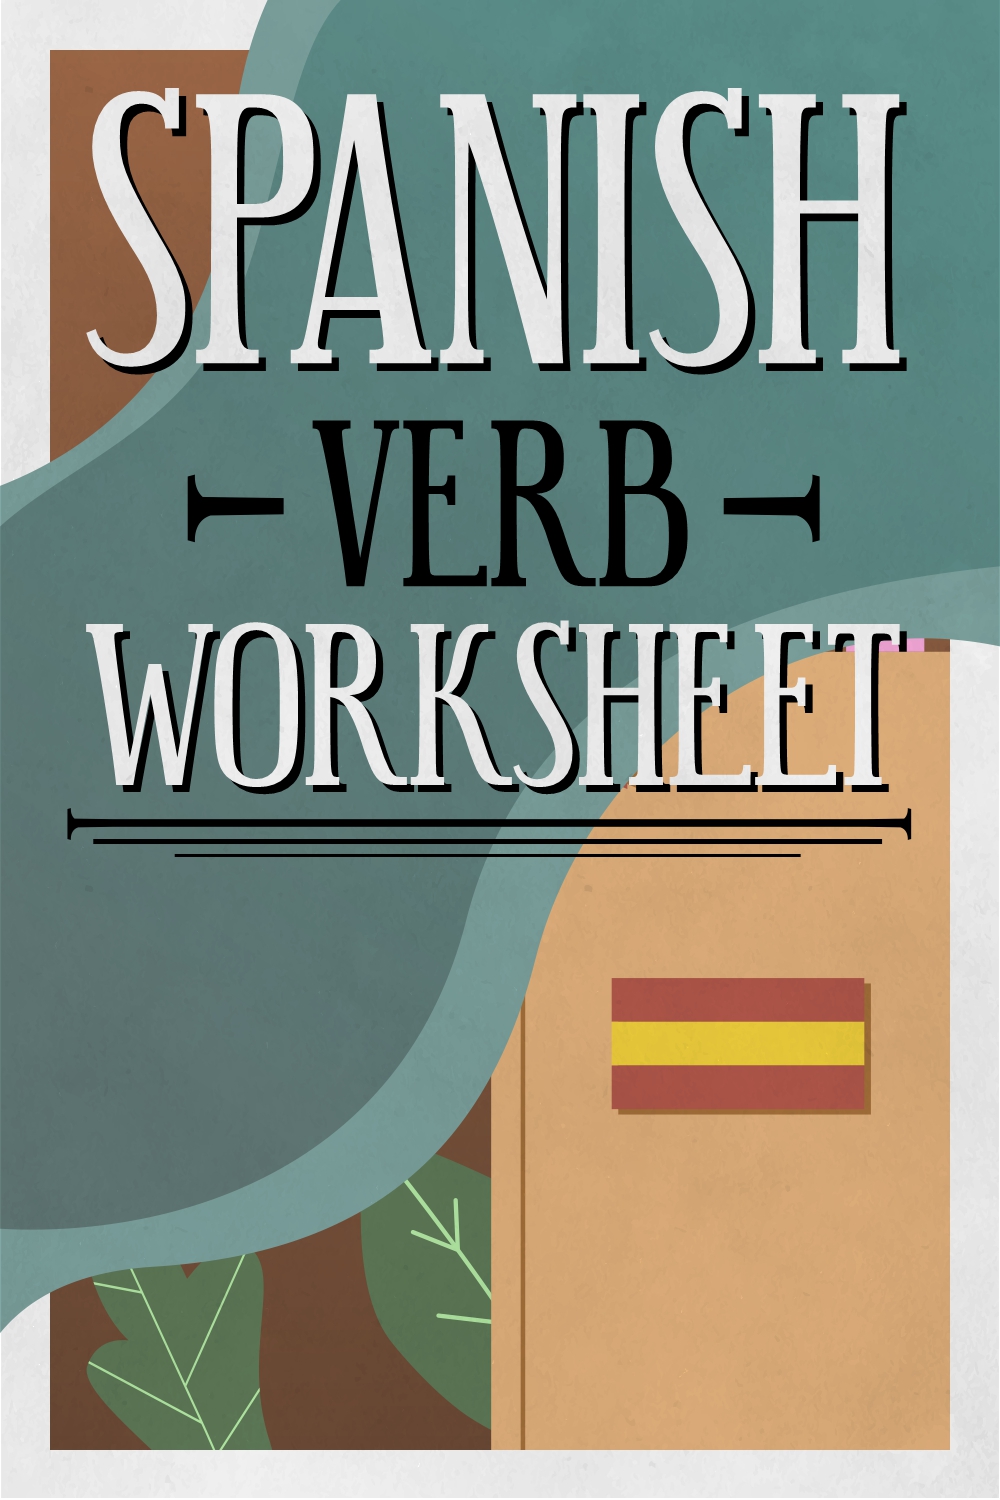 19 Images of Spanish Verb Worksheets